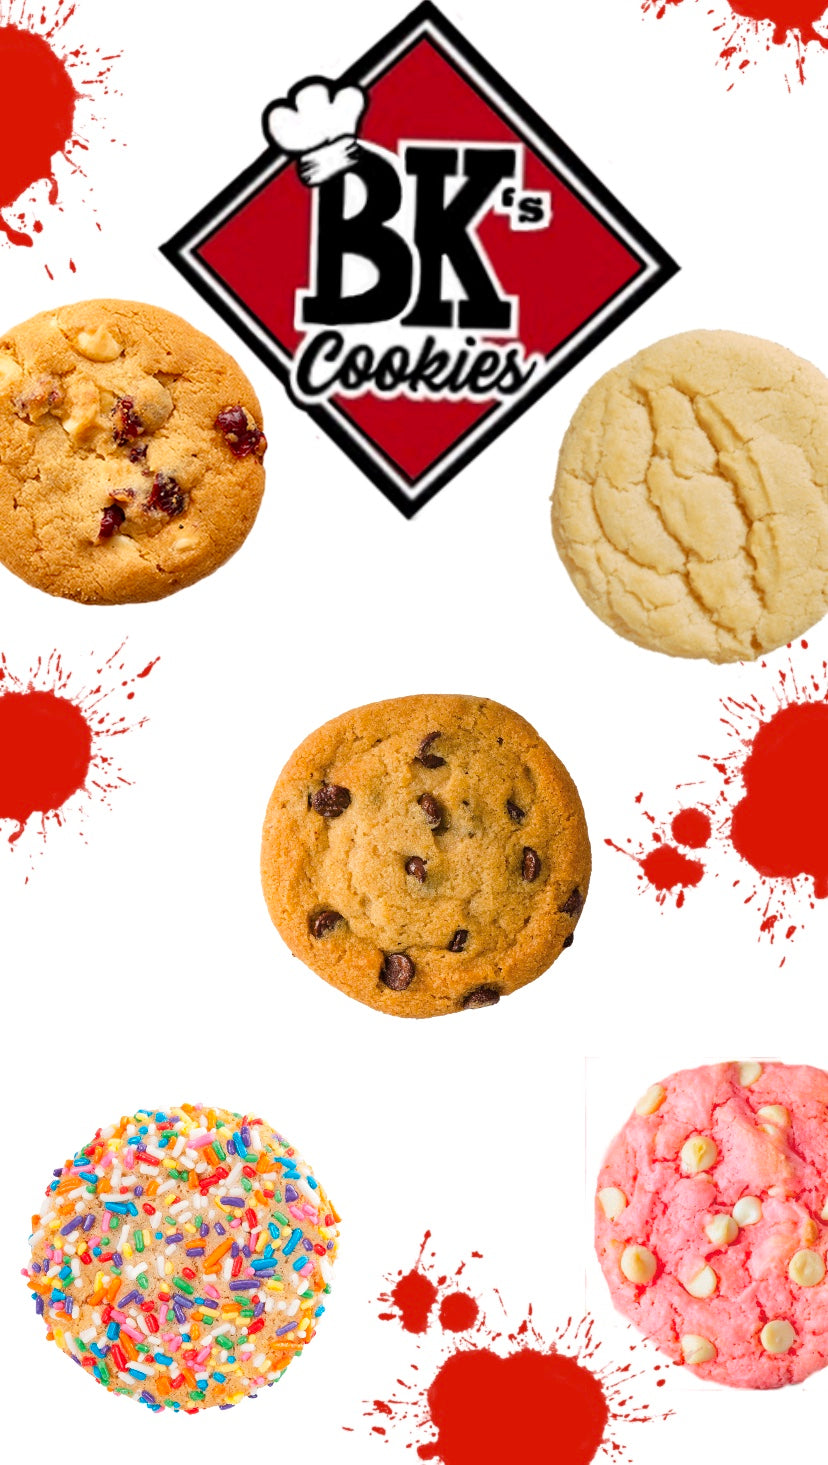 Cookies of the month